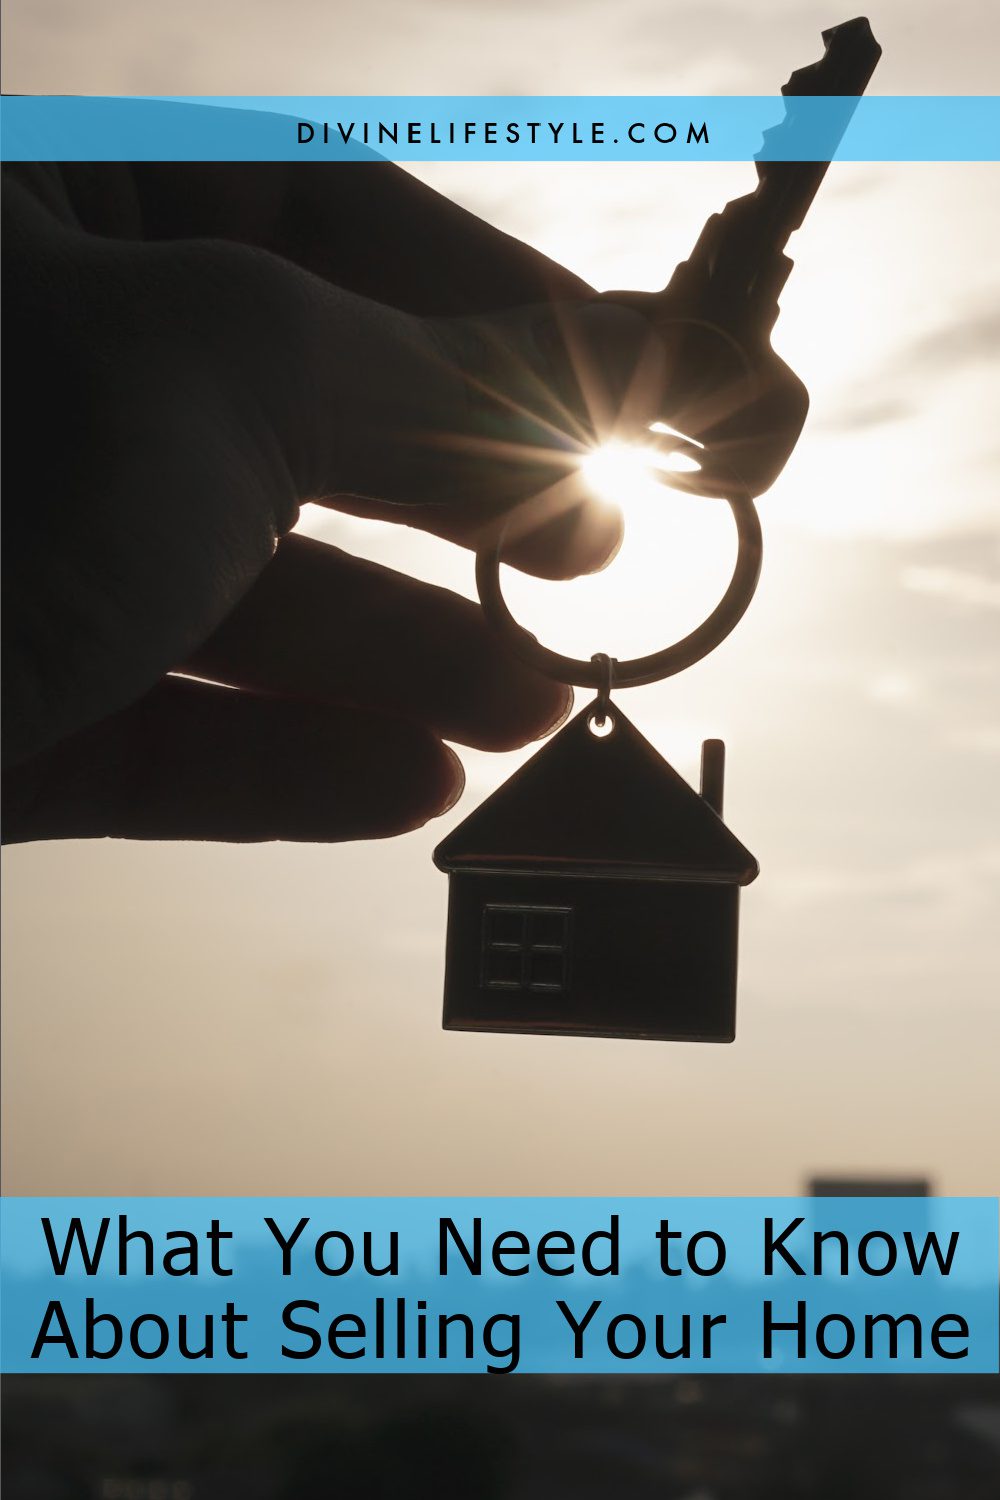 What You Need to Know About Selling Your Home